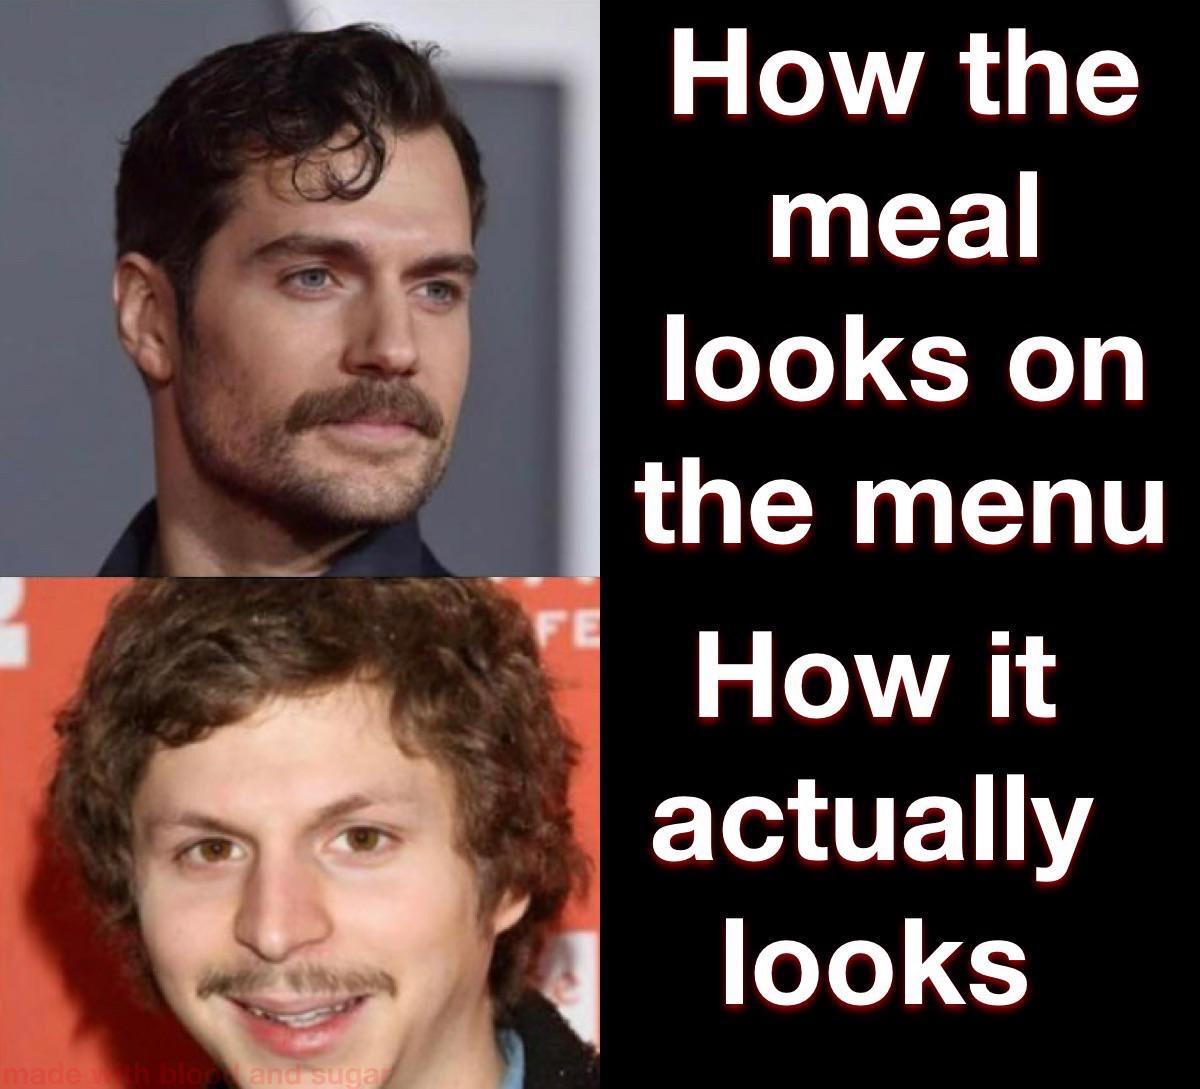 funny gaming memes - think exam meme - How the meal looks on the menu Fe How it actually looks loana suga